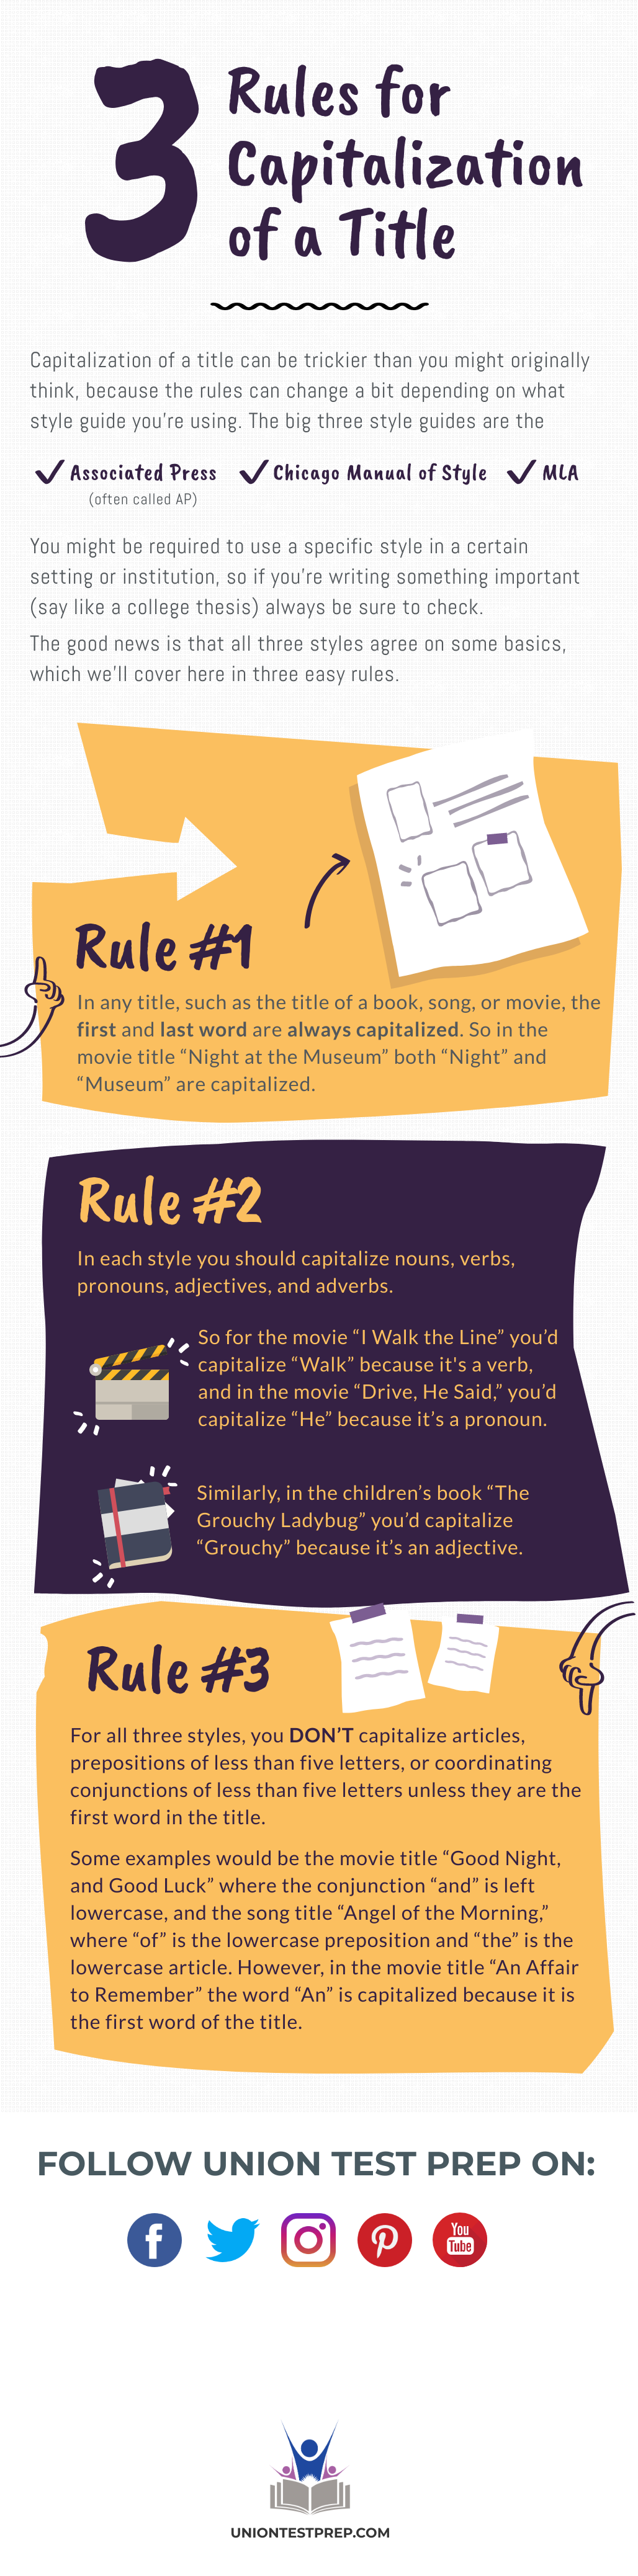 Rules of Capitalization of a Title